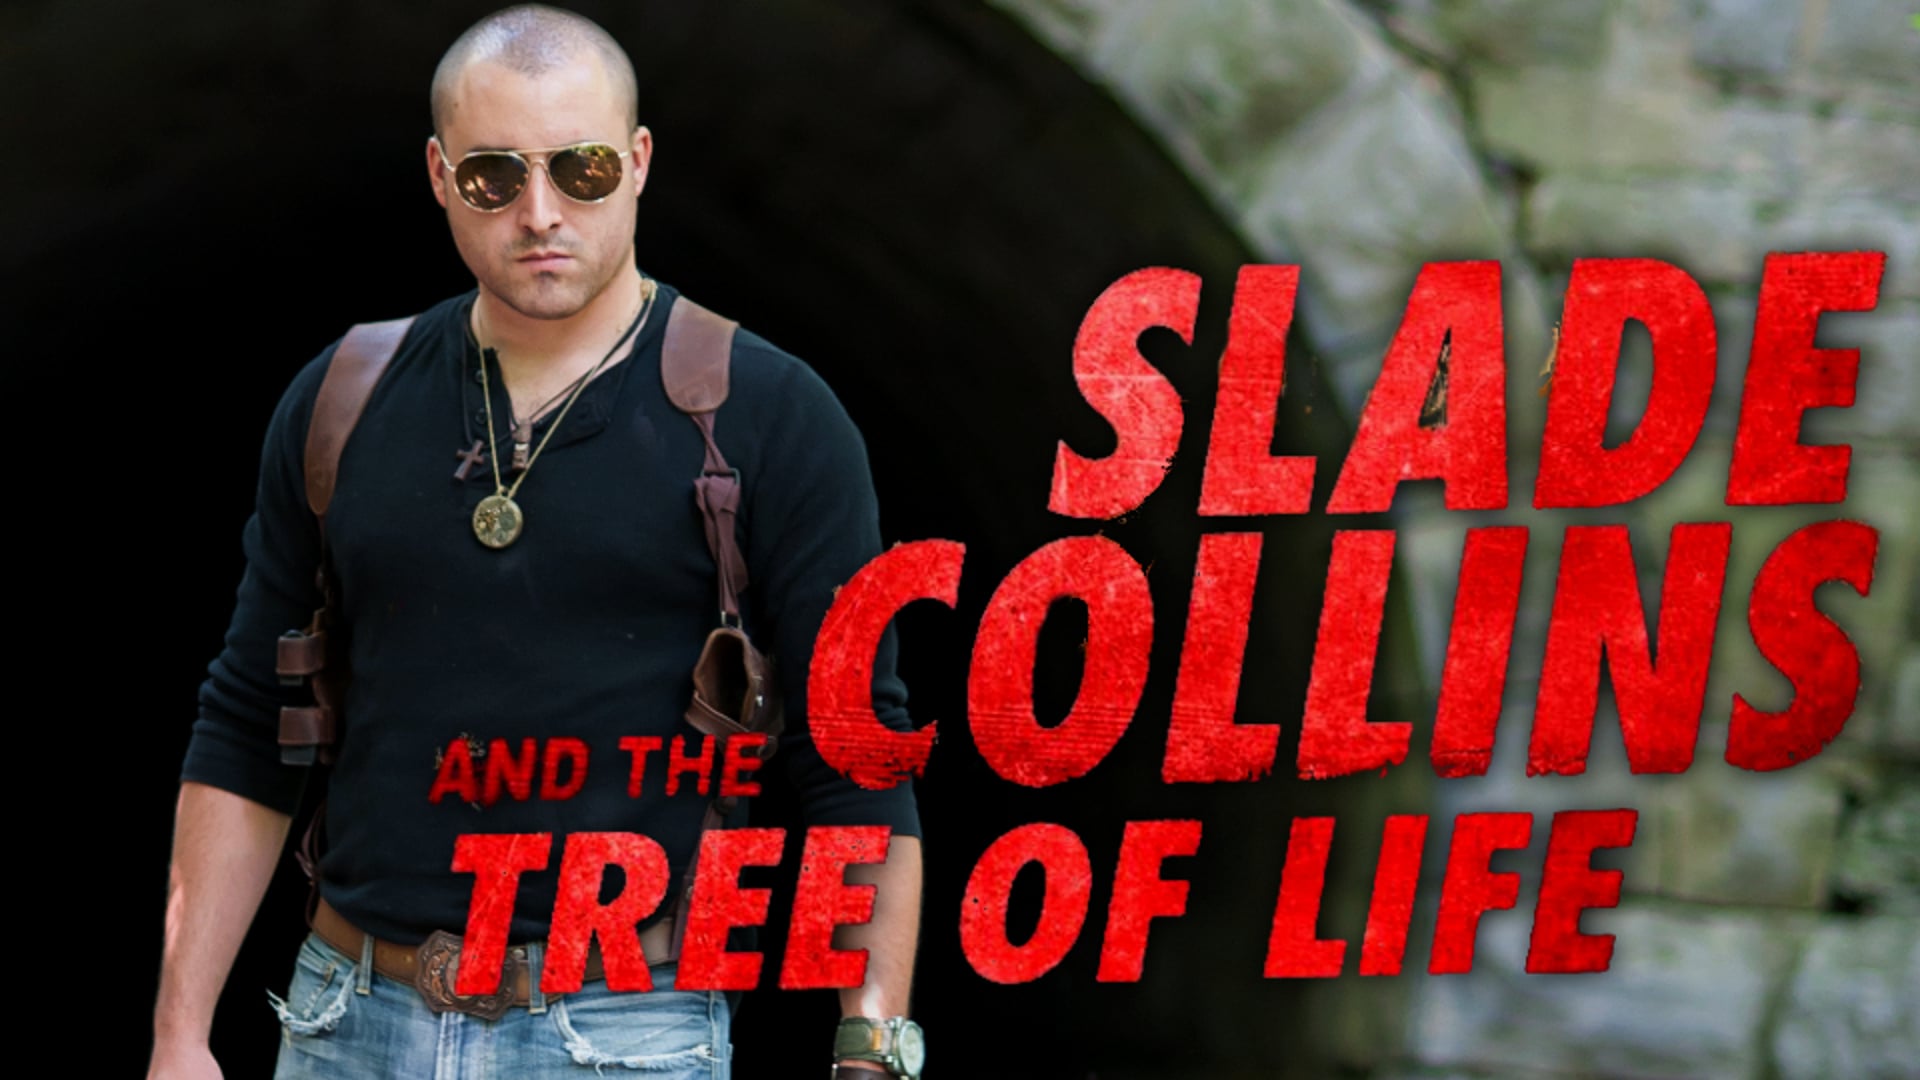 Slade Collins and The Tree of Life